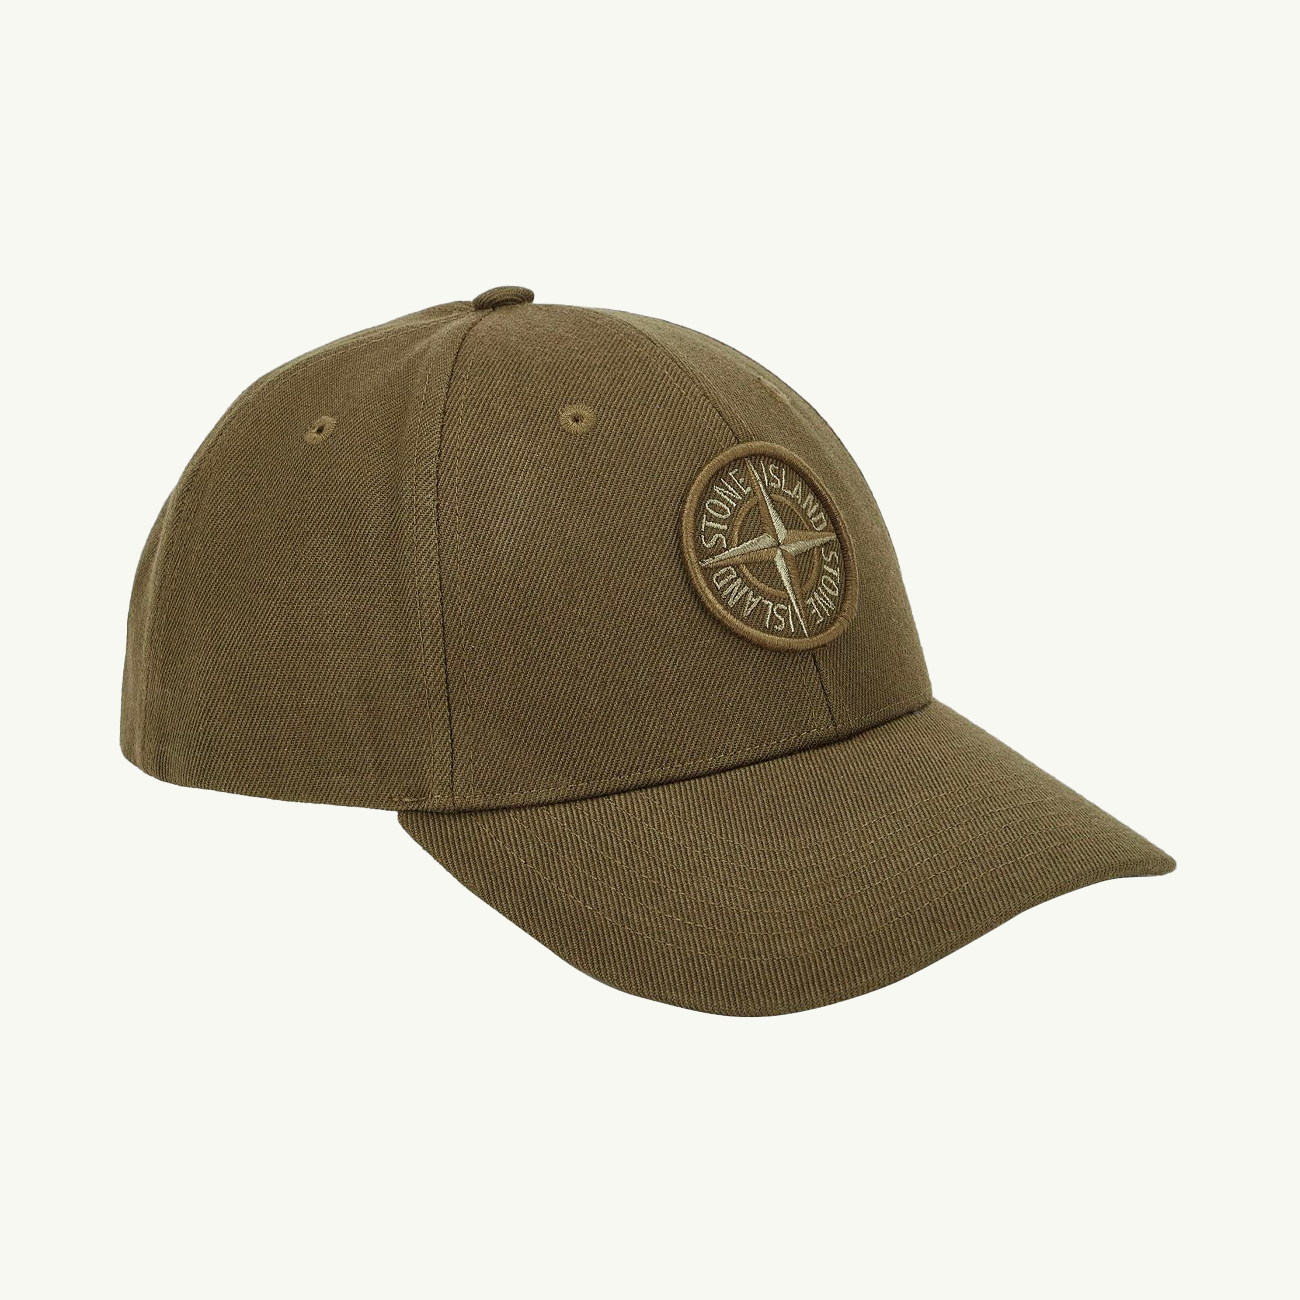 Cap Embroidered Compass Patch - Olive Green 5879